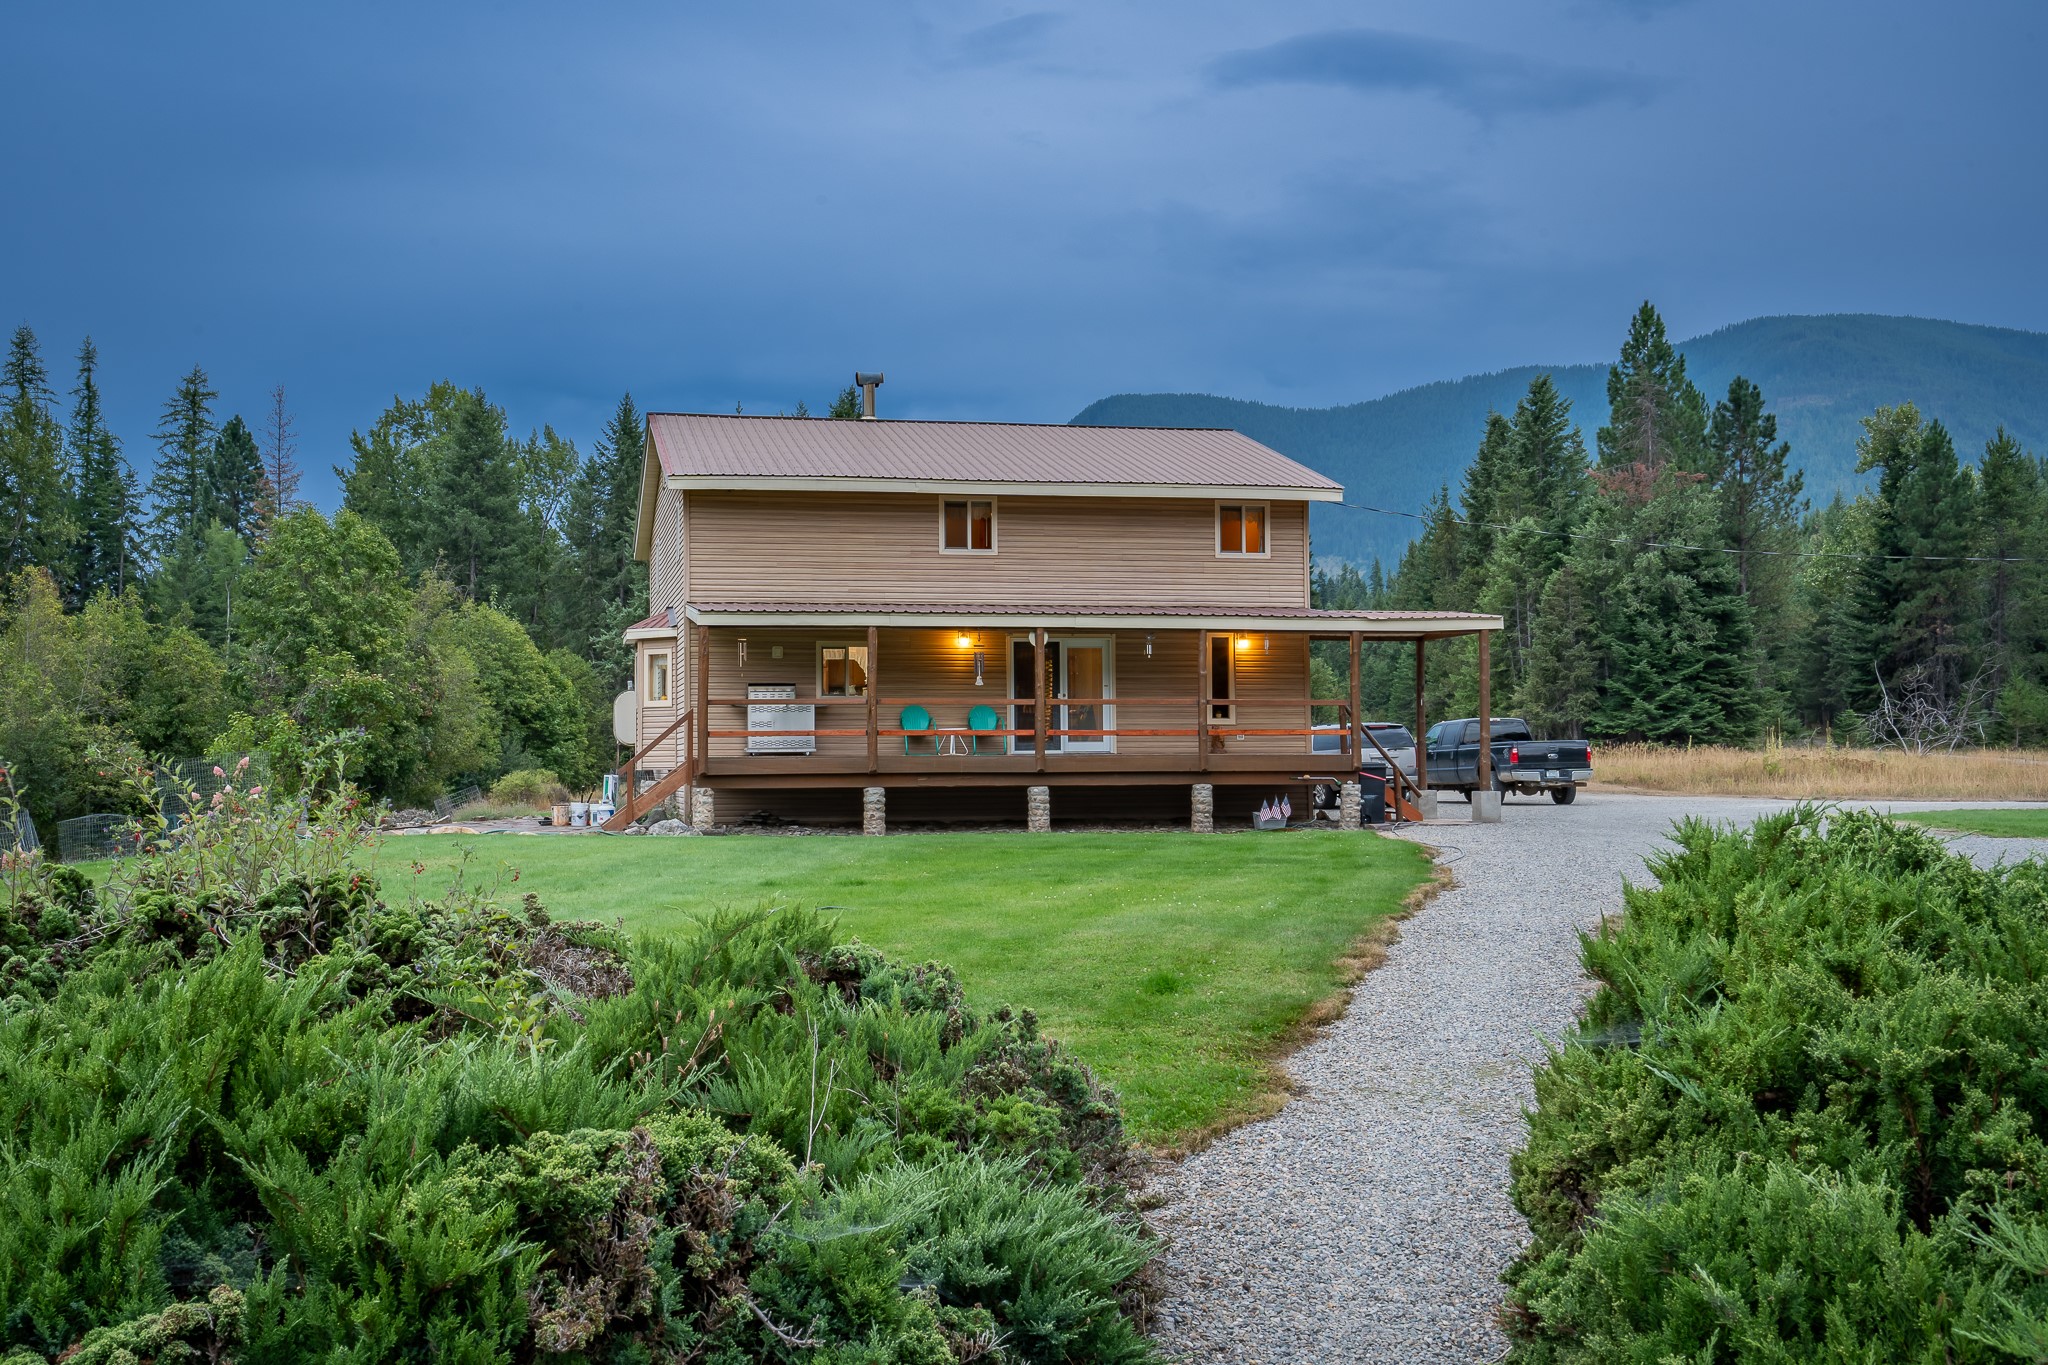 extraordinary piece of paradise nestled in the heart of Noxon, Montana. Enveloped by majestic mountains, this idyllic abode offers over 2,000 square feet of open-concept living space where natural beauty meets modern convenience.As you step outside, you're instantly greeted by the calming melodies of Pilgrim Creek, meandering peacefully through your backyard. This serene setting provides a tranquil backdrop for relaxation and contemplation, as well as a natural playground for fishing enthusiasts. The area is renowned for its abundant trout population, making it a haven for both novice and seasoned anglers alike.For those who fancy a more active lifestyle, the surrounding wilderness is perfect for hunting and hiking, encapsulating the raw and untouched beauty of the Montana landscape. Just a short stroll away, you'll find the Cabinet Gorge Reservoir and community parks, popular destinations for boating, swimming, and picnicking.This property is uniquely positioned for prospective buyers with a passion for the great outdoors. The home is sold in conjunction with a well-established outfitting business known for its high-quality outdoor adventures. This opportunity provides a seamless integration of work, play, and relaxation—truly embodying the Montana lifestyle. Situated just a scenic drive away from the vibrant Sandpoint area, you'll have easy access to the largest lake in Idaho, Lake Pend Oreille. Here, you'll discover a variety of recreational activities from boating and fishing to water skiing and kayaking. This stunning locale is also home to various events, restaurants, shopping, and cultural attractions, providing a balance of outdoor exploration and urban amenities.
Whether you're seeking a peaceful retreat, an outdoor adventure hub, or a business opportunity in the heart of Montana's wilderness, this property offers it all. Experience the tranquil rhythm of life in Noxon, where the mountains meet the sky, and every sunrise is a promise of a new adventure.

This property is to have a new boundary line adjustment to survey out home, or can be sold with entire business and structures.  List price is for home only.

Call Diane Westrum  406-897-4172 or your real estate professional